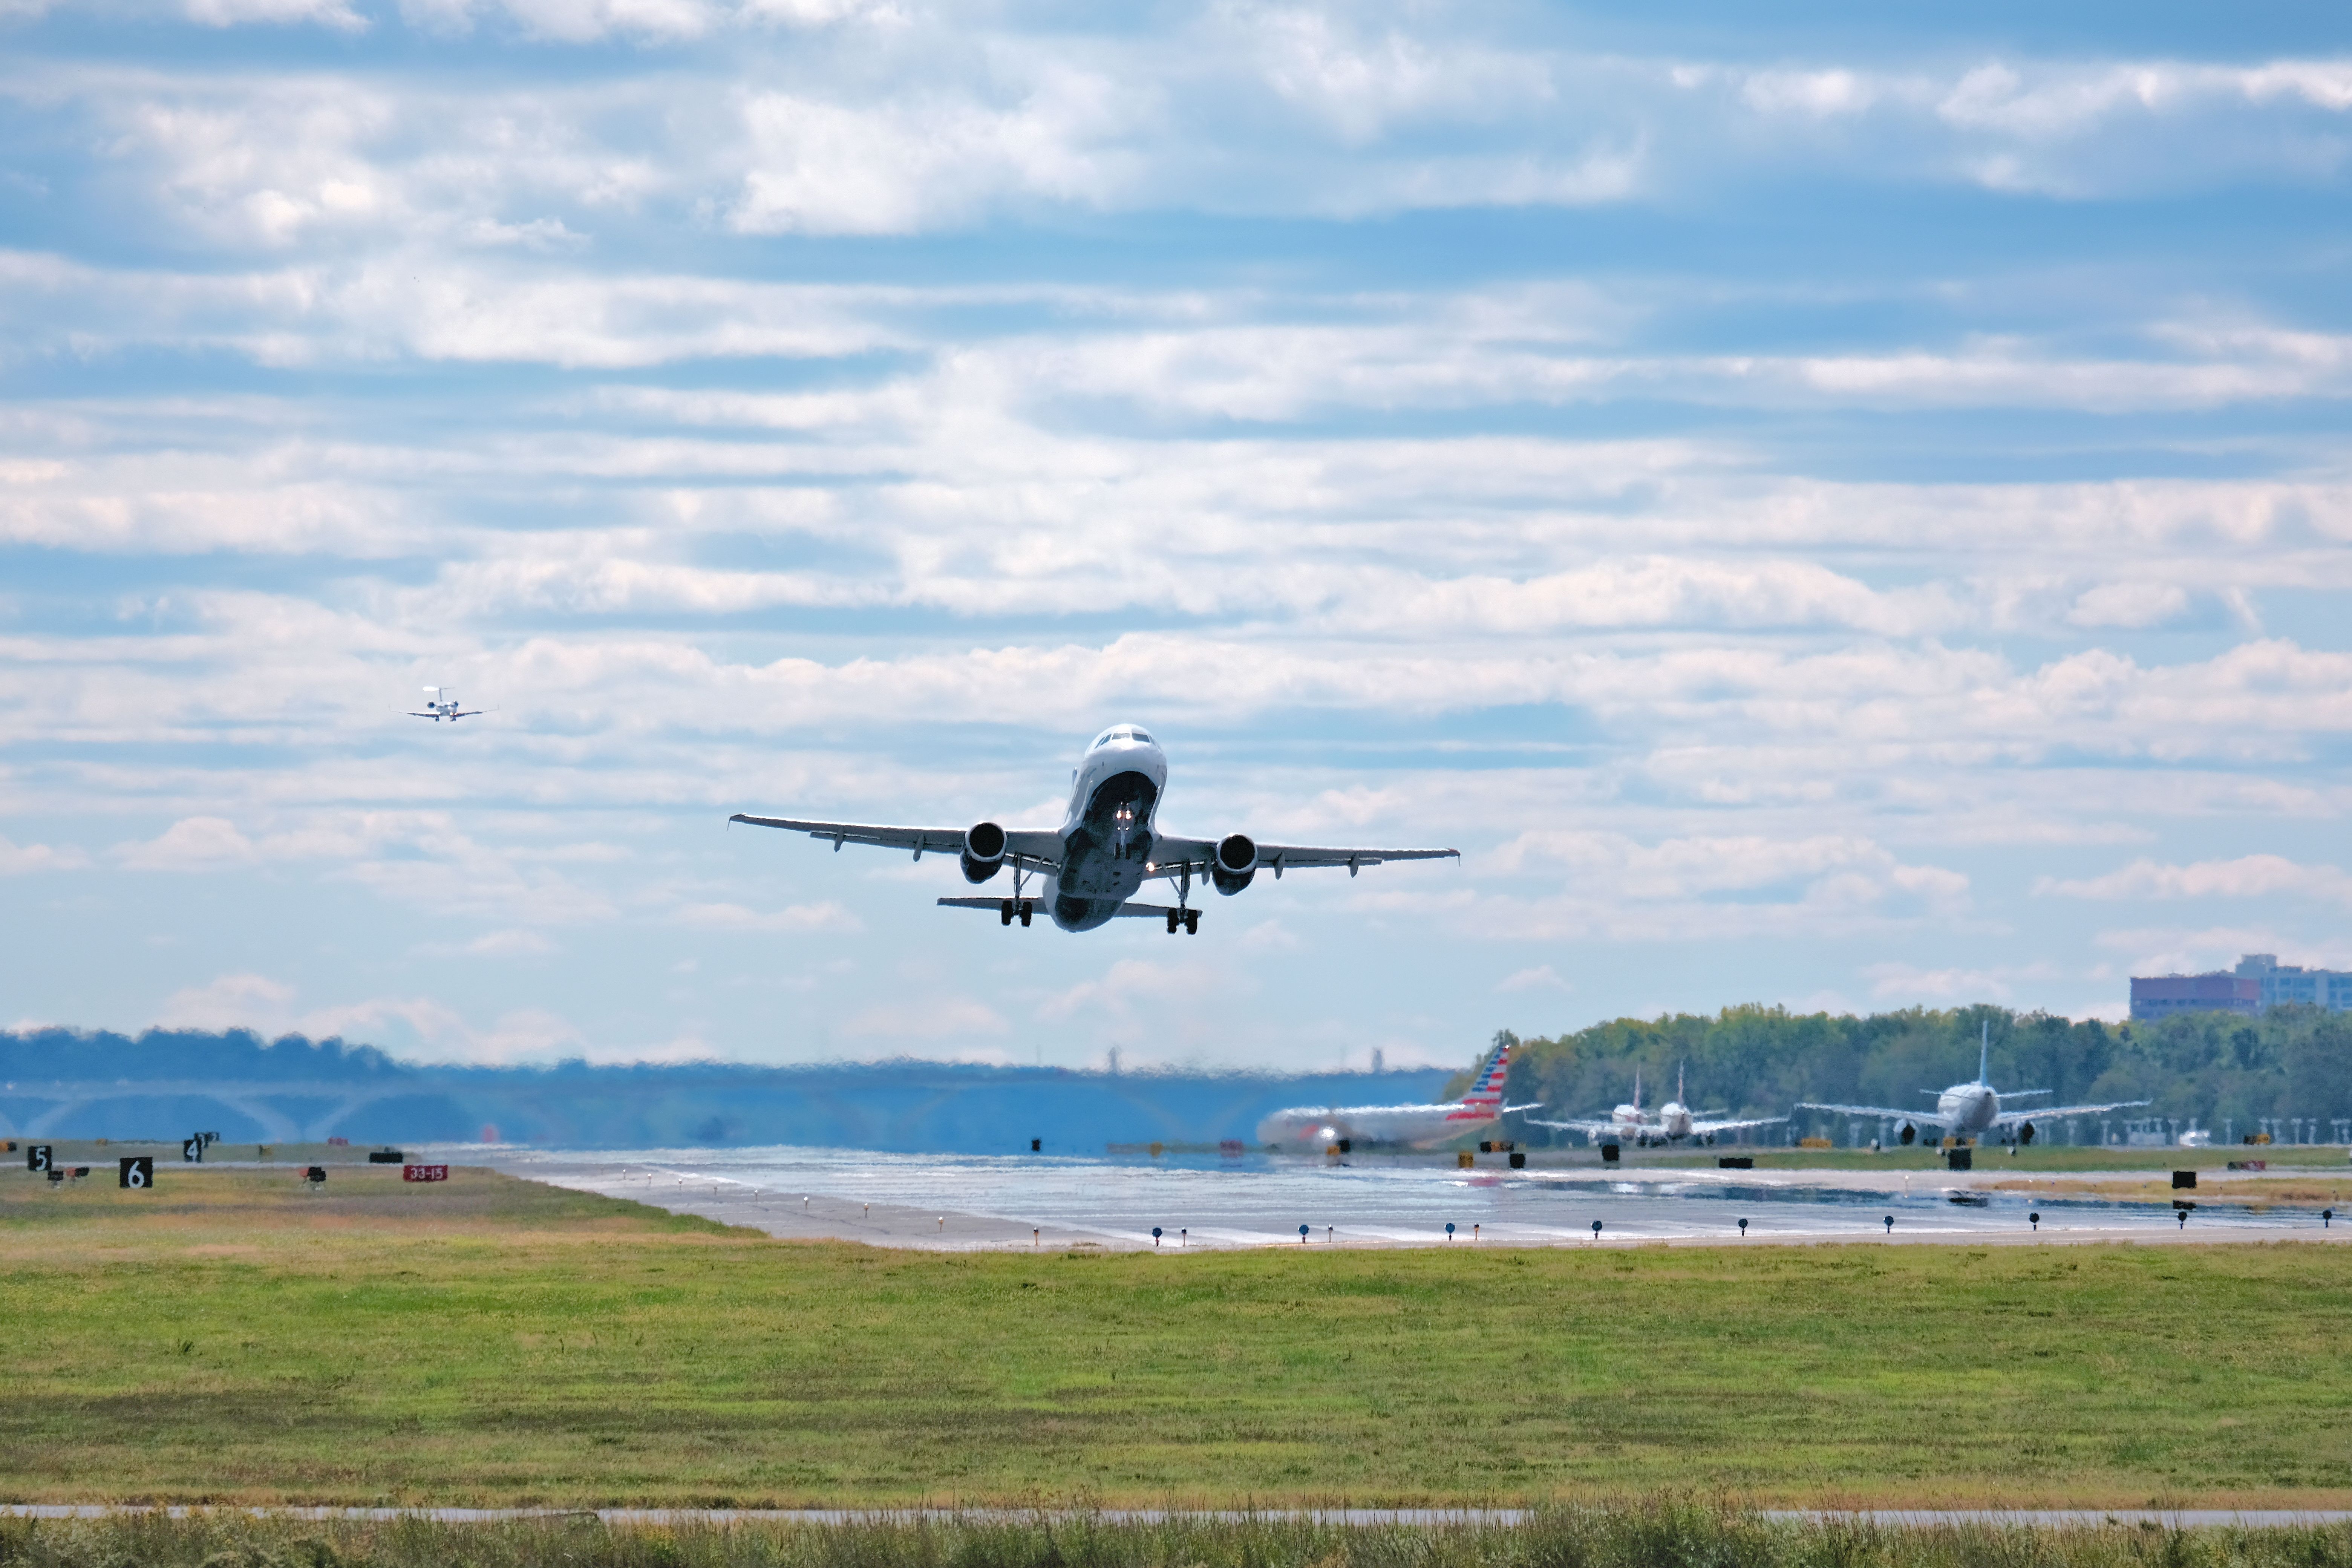 An airplane takes off from Reagan National Airport in Arlington, Virginia as seen from Gravelly Point park.